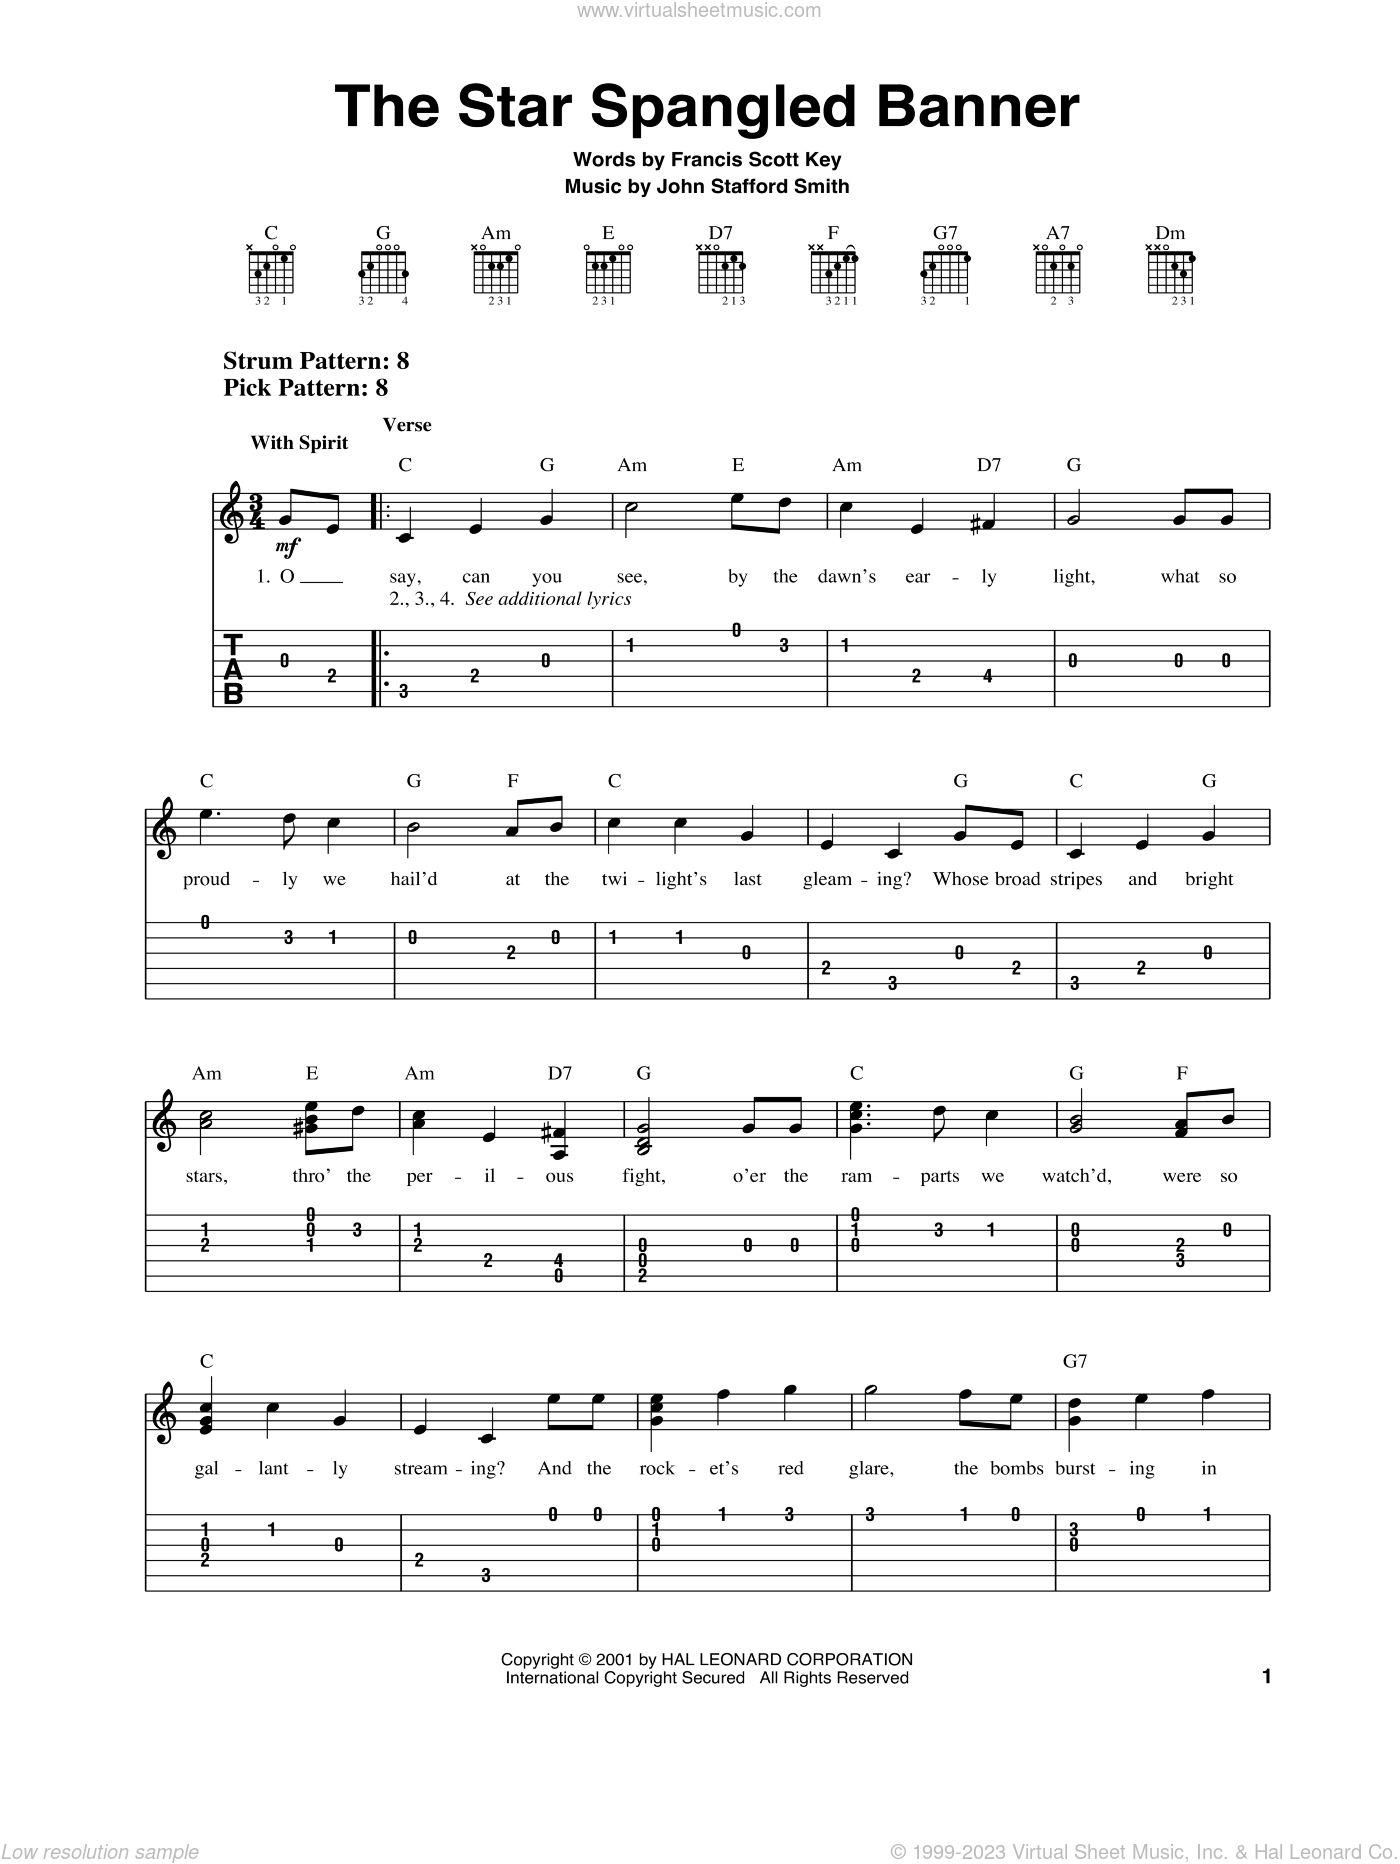 https://cdn3.virtualsheetmusic.com/images/first_pages/HL/HL-305954First_BIG_1.png